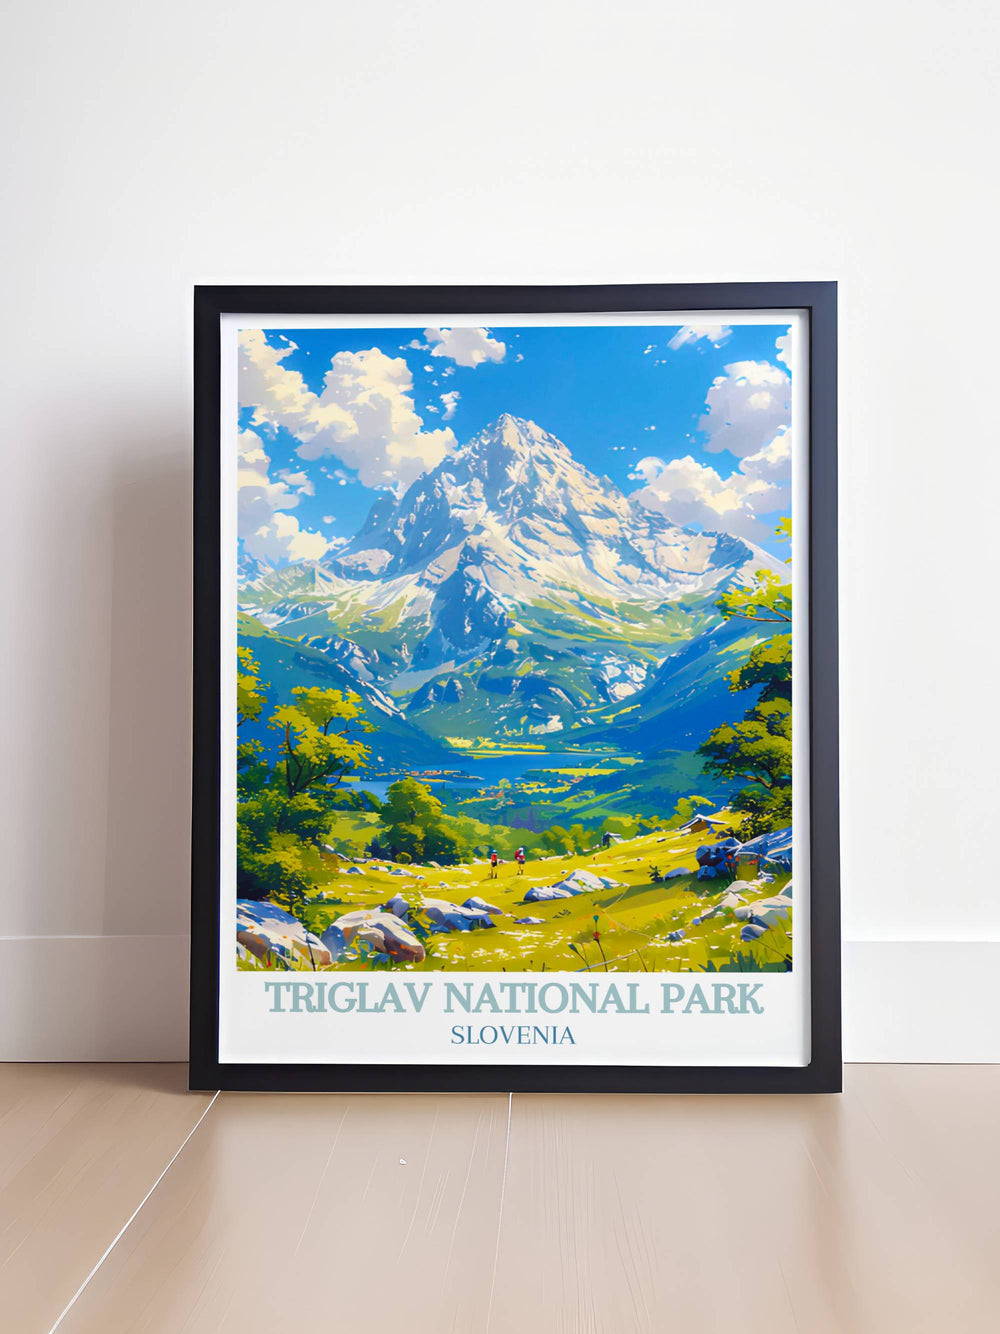 Beautiful poster featuring the scenic landscapes of Triglav National Park with vibrant colors and intricate details of Mount Triglav and the Julian Alps.